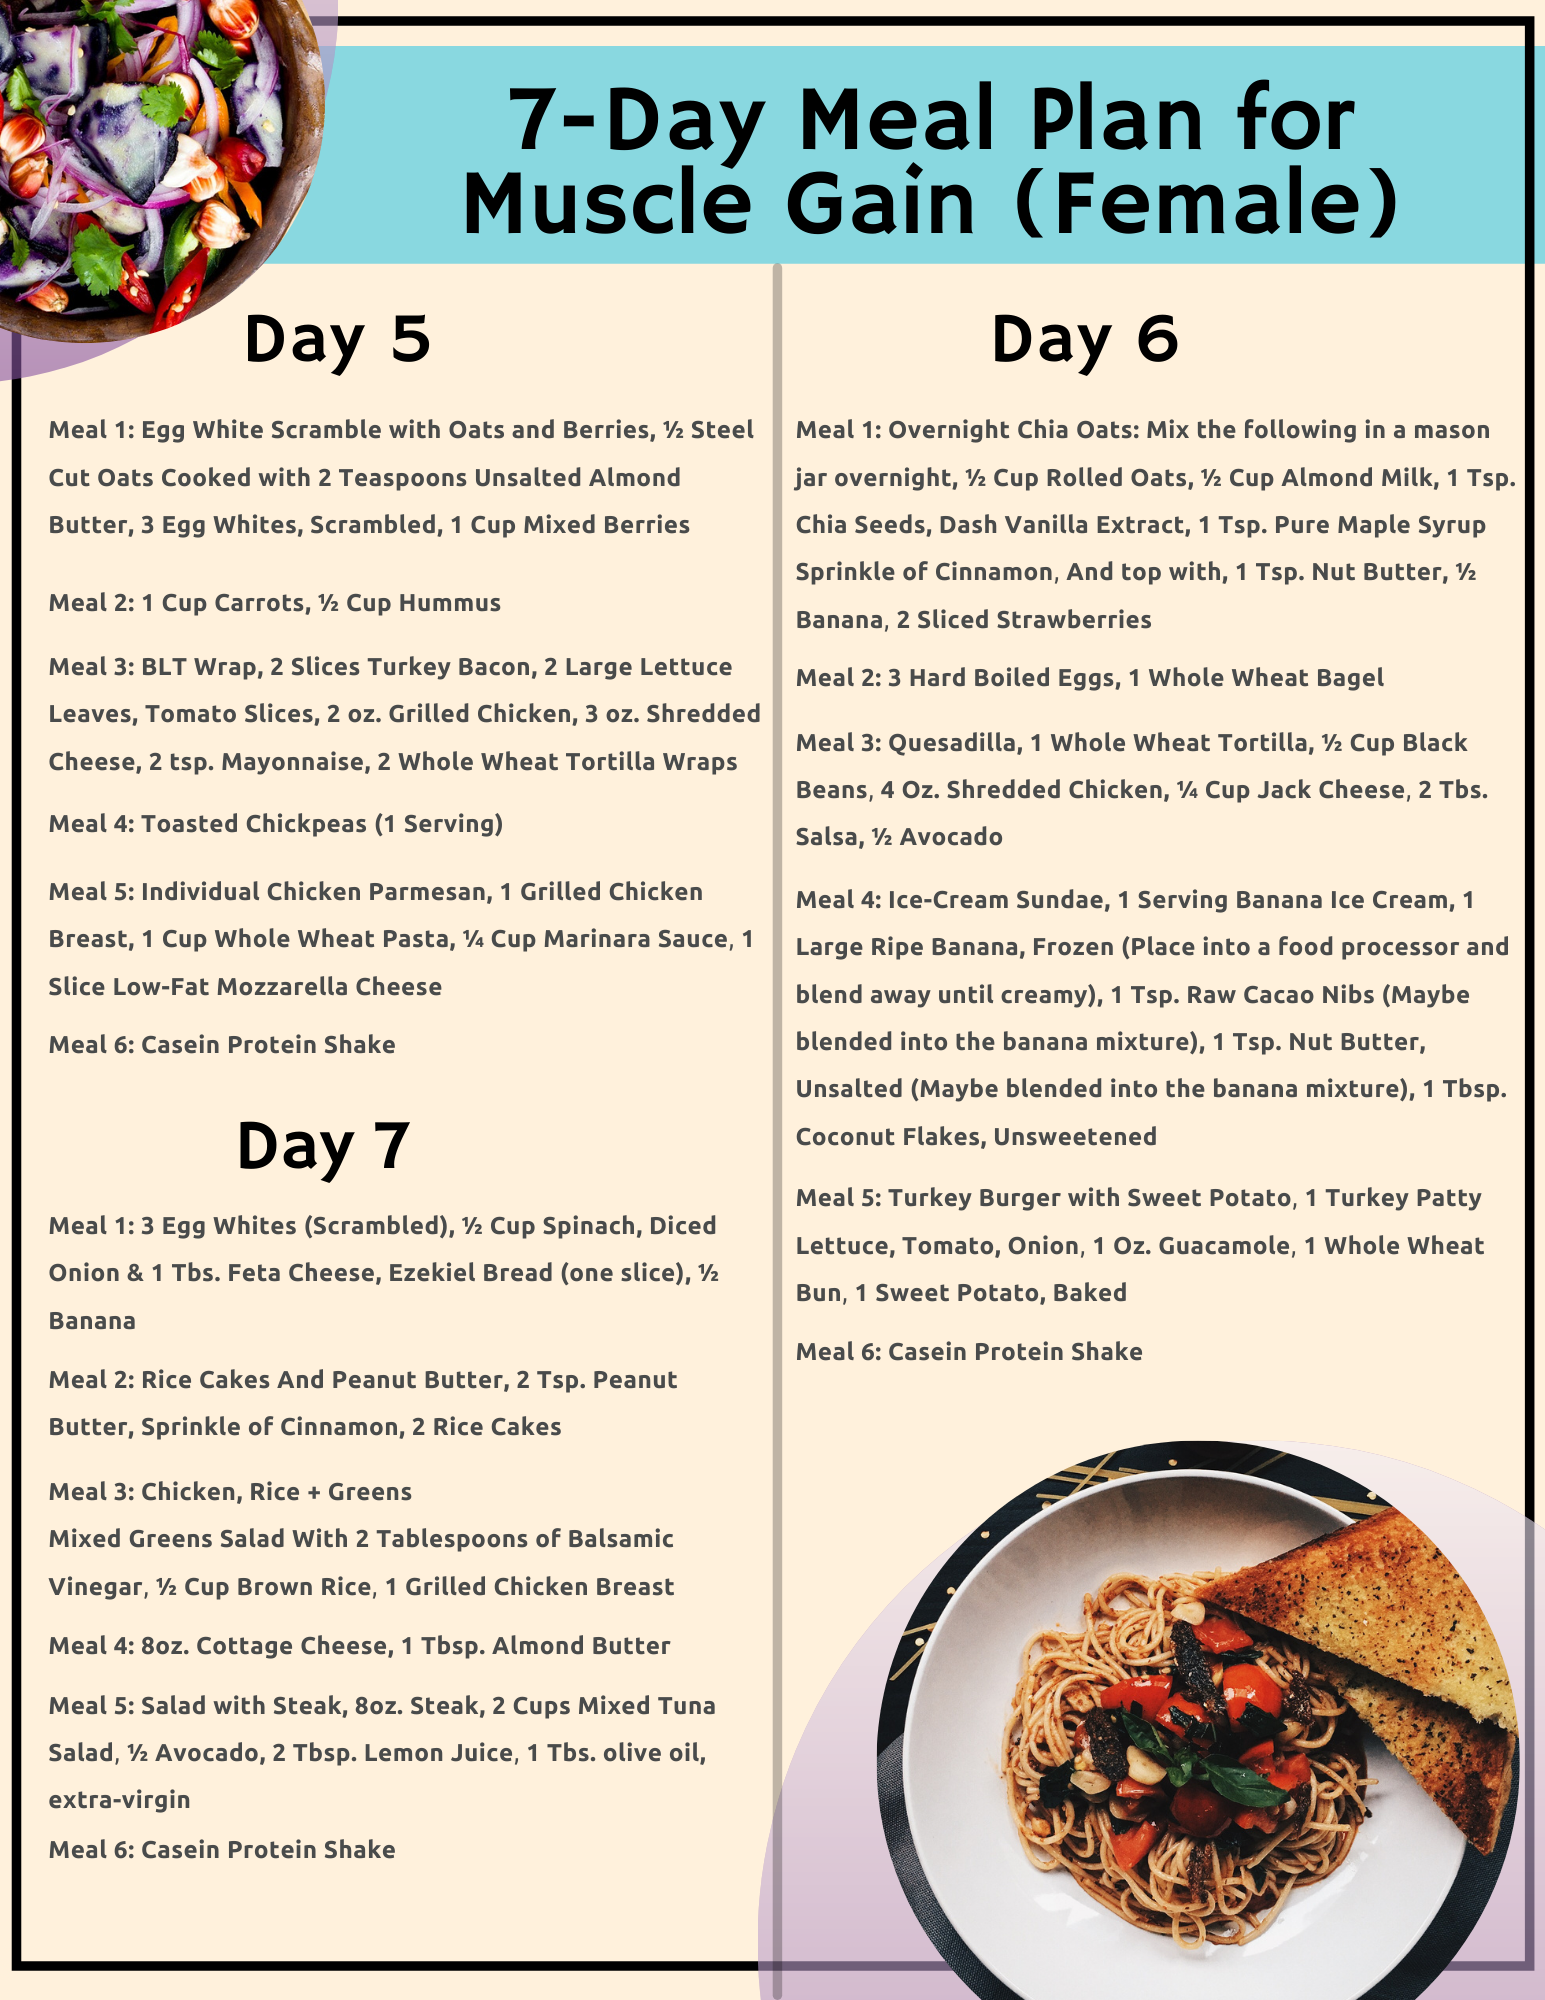 7-Day Meal Plan for Muscle Gain (Female)(1)